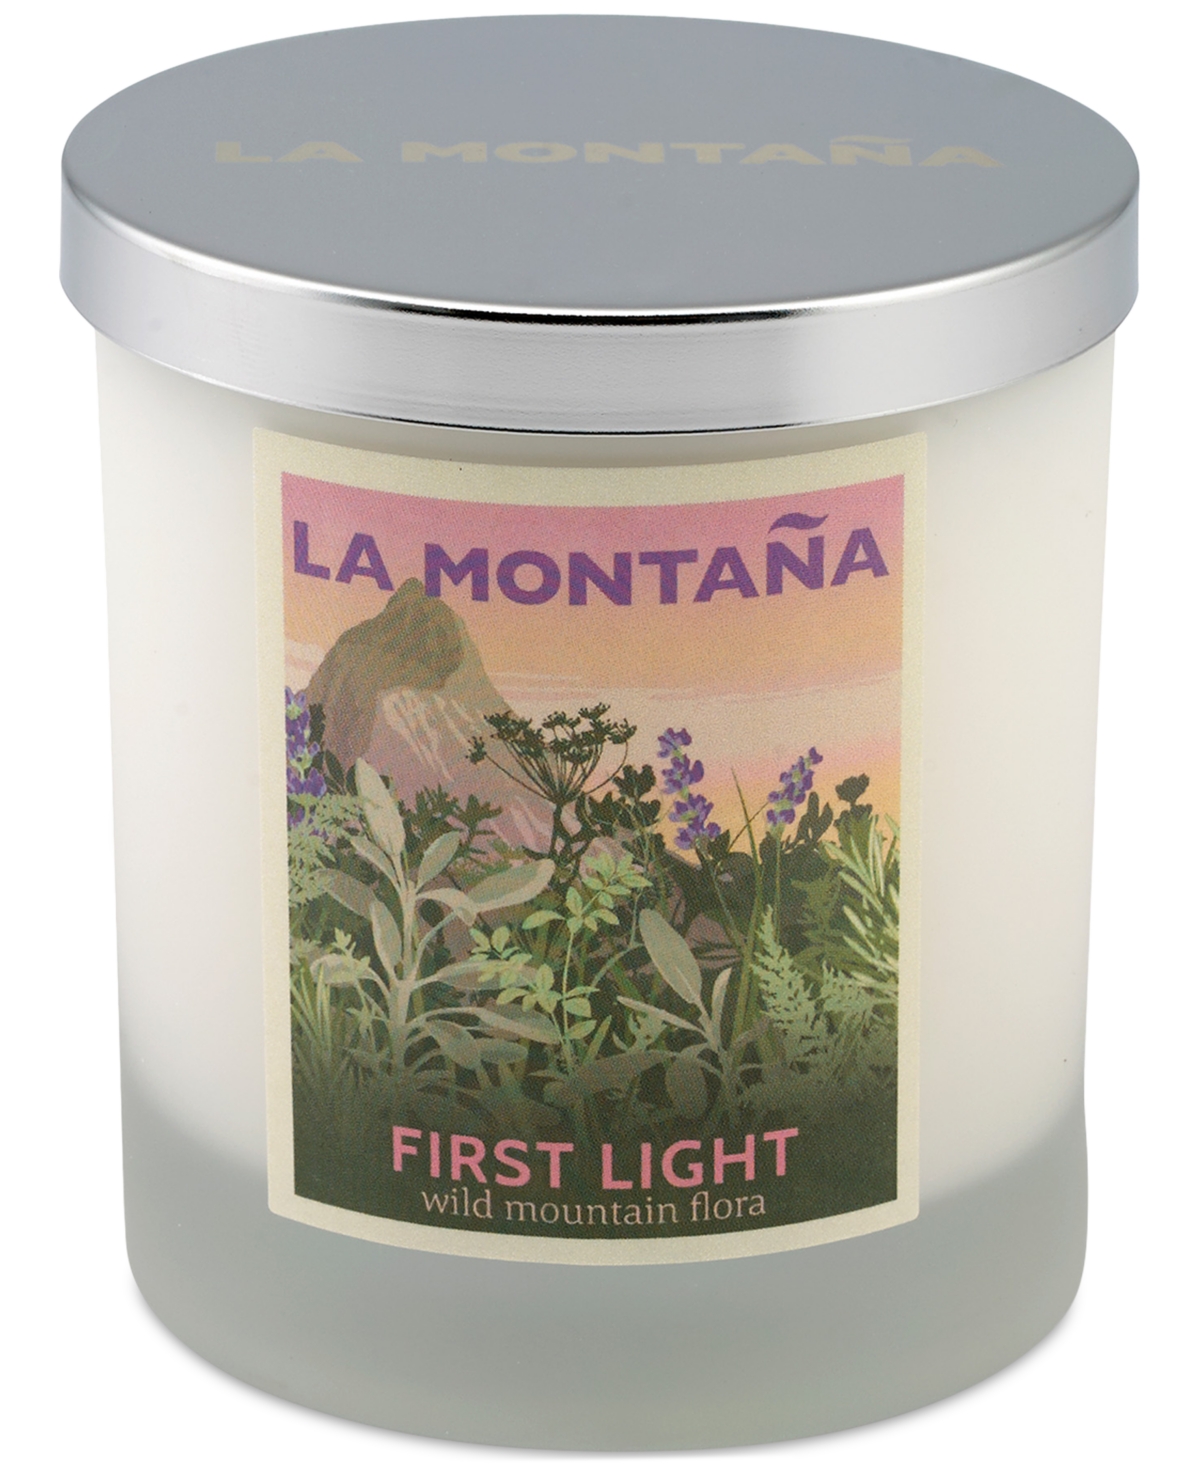 La Montana First Light Scented Candle, 8 oz.